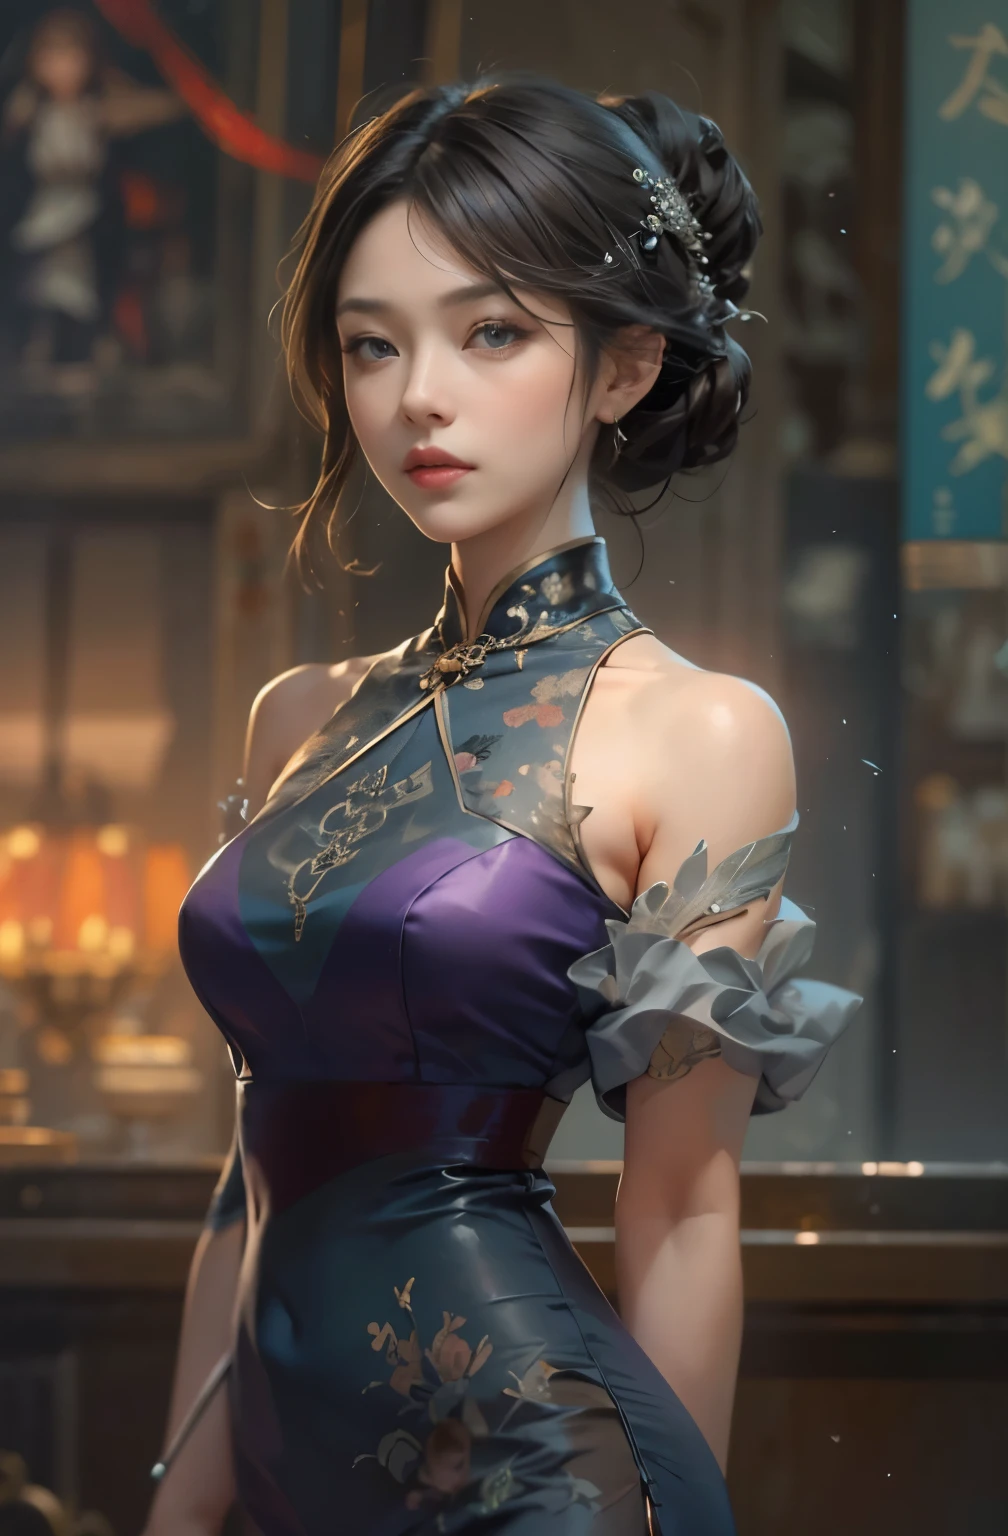 A painting of a beautiful young woman standing quietly, 美しいHong Kongの夜景, flower of society, She is wearing an elegant purple cheongsam, Gwaites style artwork, Artjam and Ati Gailan, beautiful character drawings, Written by Jean Jay., style art buds, Artjam and Luan Jia, art gelm style, Ruan Jia and Artgerm, highest quality, perfect angle, perfect composition, best shot, official art, cinematic light, figurative art, Beautiful and expressive paintings, Beautiful artwork illustration, wonderful, cool beauty, clear, Mysterious, highest quality, official art, perfect composition,perfect angle, best shot, women only, sharp outline, In the middle of a conspiracy, faces behind the scenes, dark government official, dark mission, first class agent, Government agencies, Top class big name spy, Talented female spy, Beautiful women spy, Beautiful slit eyes, pretty much beautiful face, spy, spy X21, carrying a concealed gun and knife, Eyes without pupils, color eye, ideal anima,　melancholy, nostalgia, romantic, 1930s, Hong Kong, beautiful cityscape, sepia memories, unforgettable woman, Full body Esbian